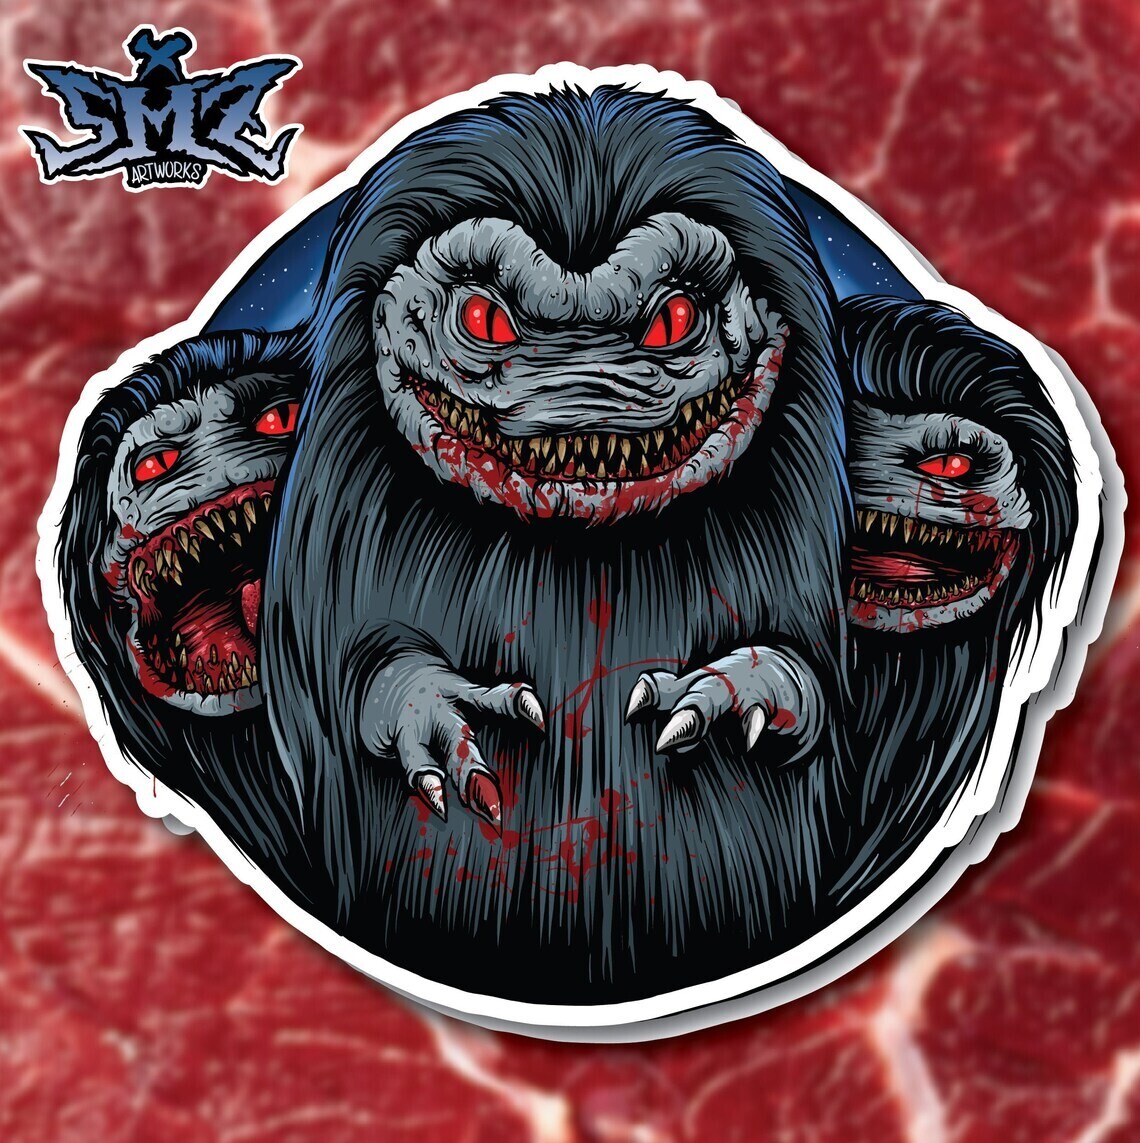 Crites from Critters Vinyl Sticker